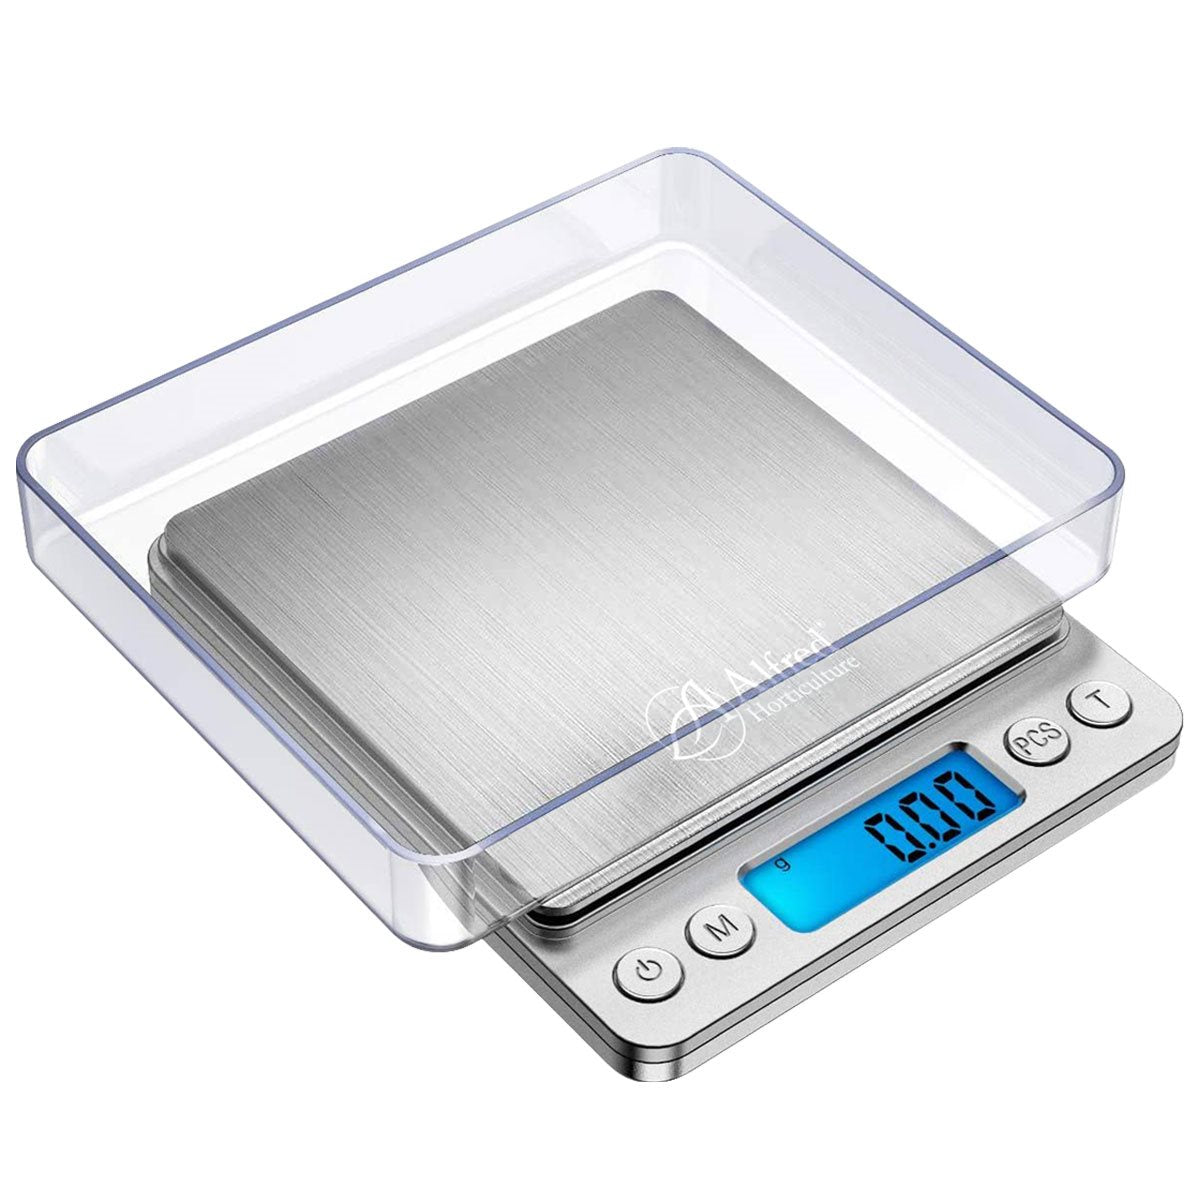 Product Secondary Image:Alfred Precision Scale 0.01g - 500g